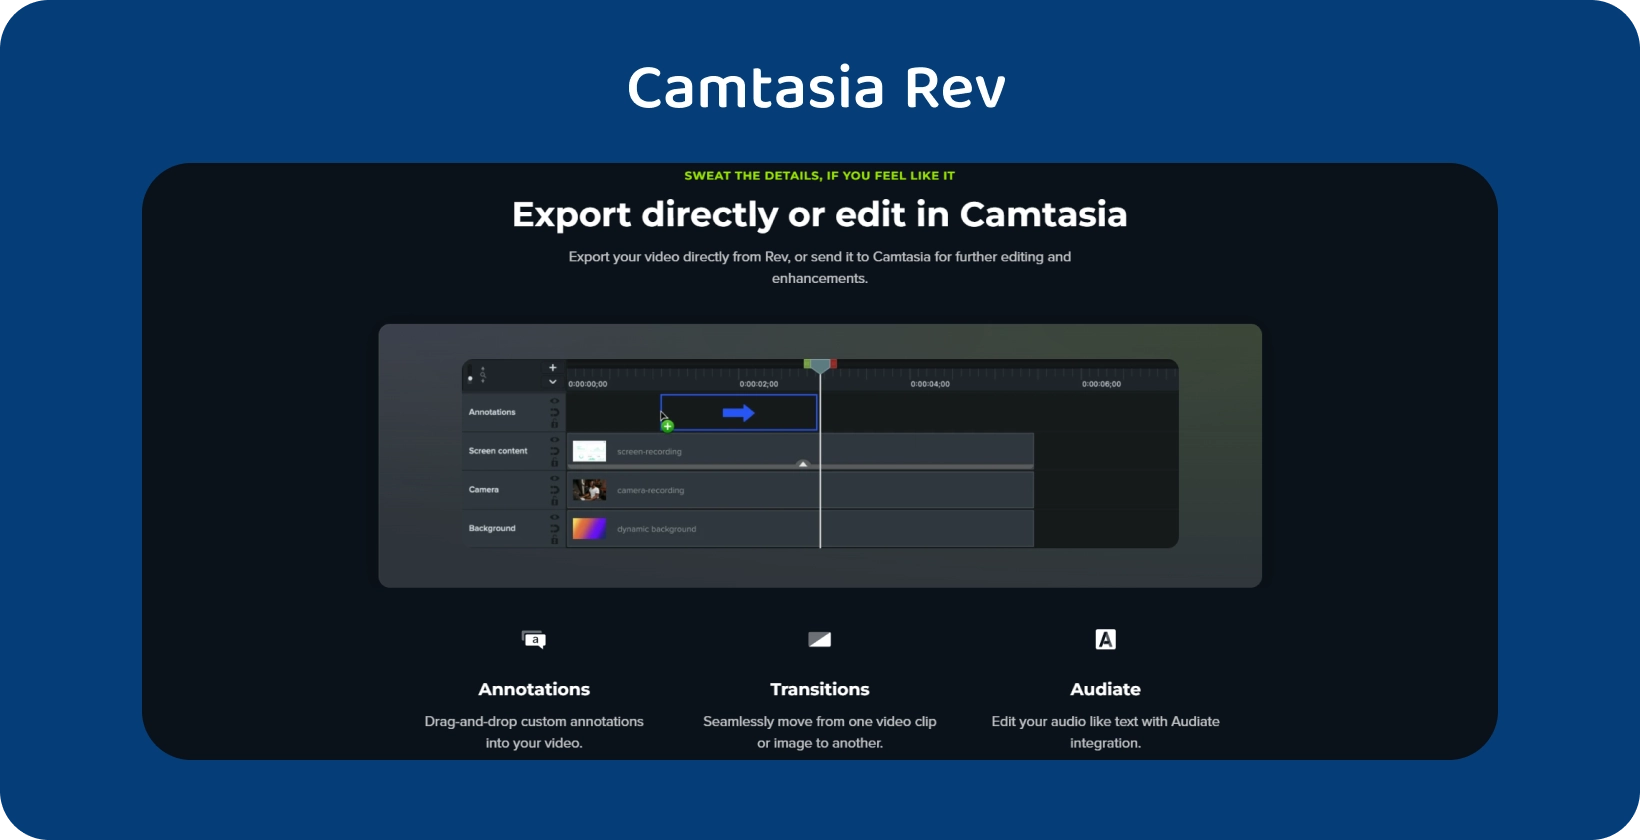 Camtasia's interface with the export captions option highlighted, indicating streamlined captioning workflow.